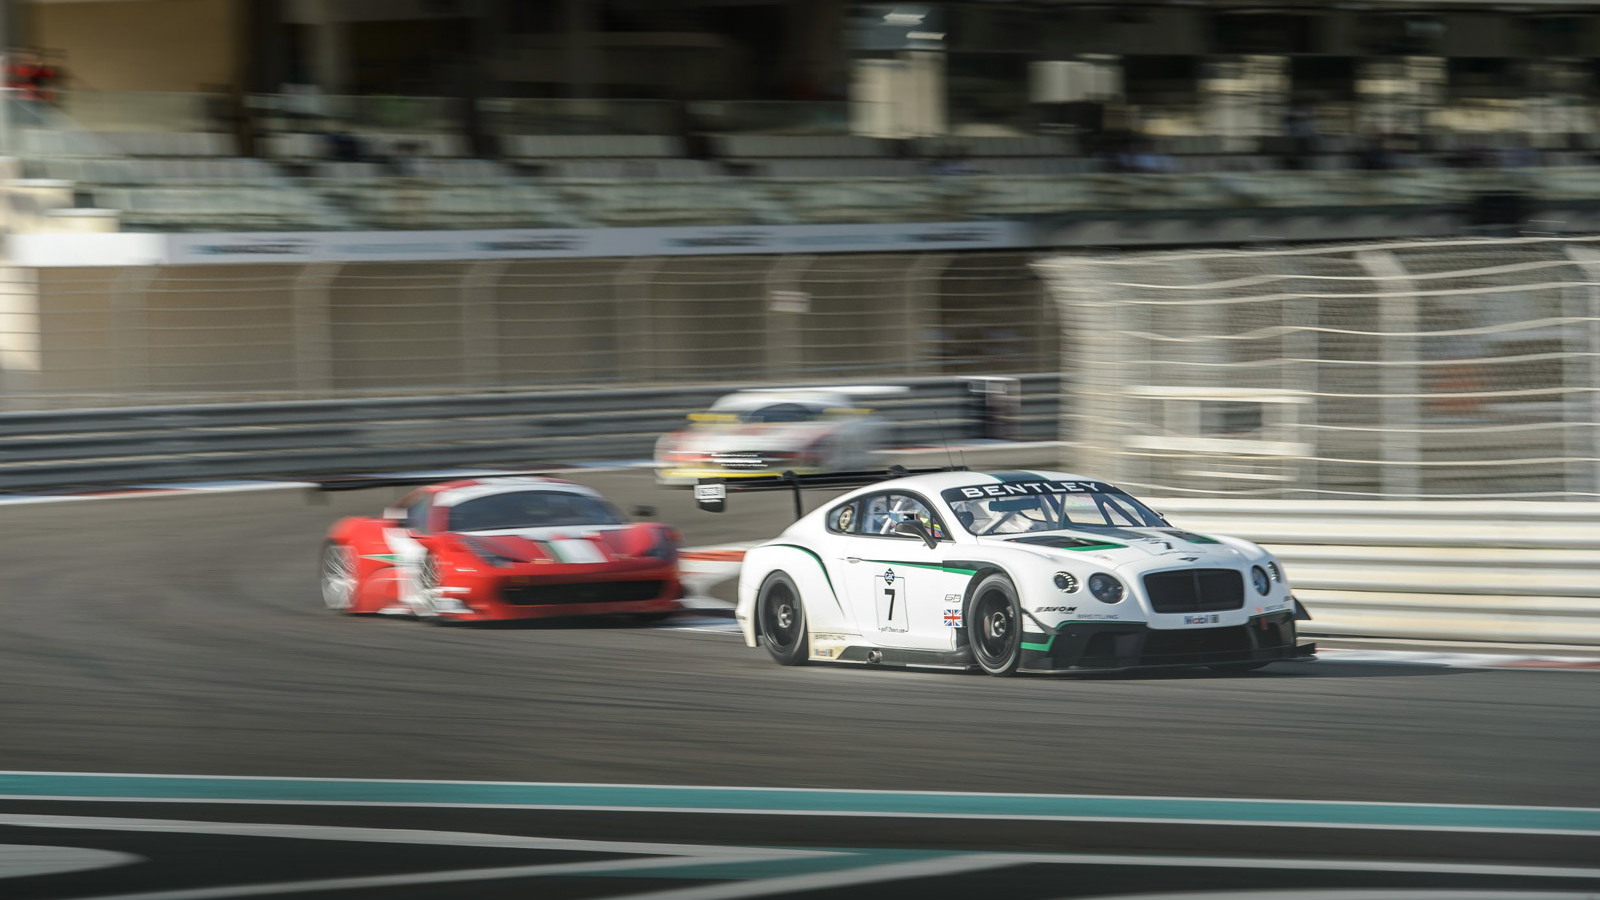 2014 Bentley Continental GT3 at the 2013 Gulf 12 Hours of Abu Dhabi